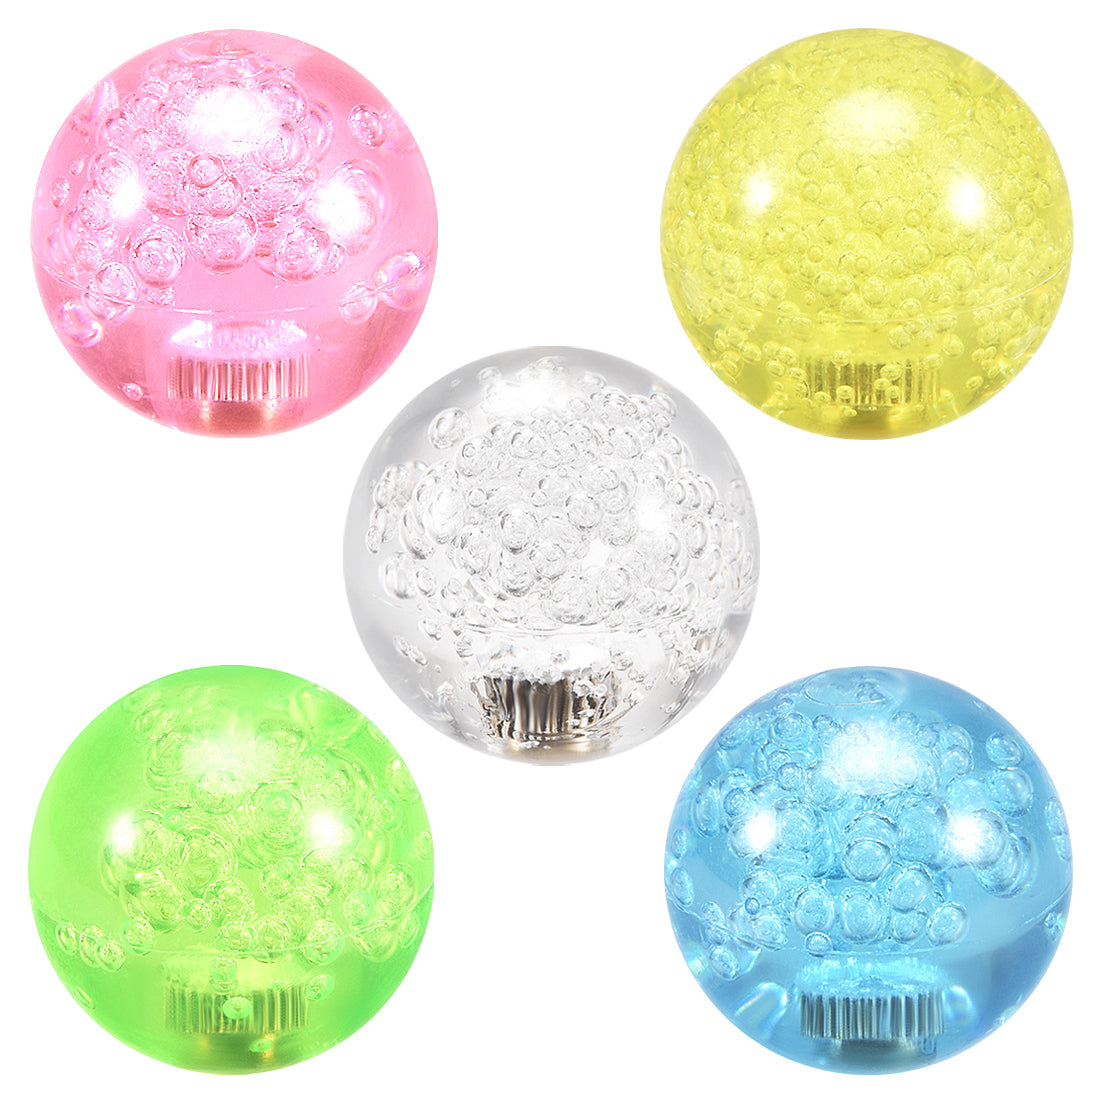 uxcell Uxcell Joystick Ball Top Handle Rocker Round Head Arcade Fighting Game DIY Parts Replacement Crystal Pink Yellow Blue Green White 5Pcs